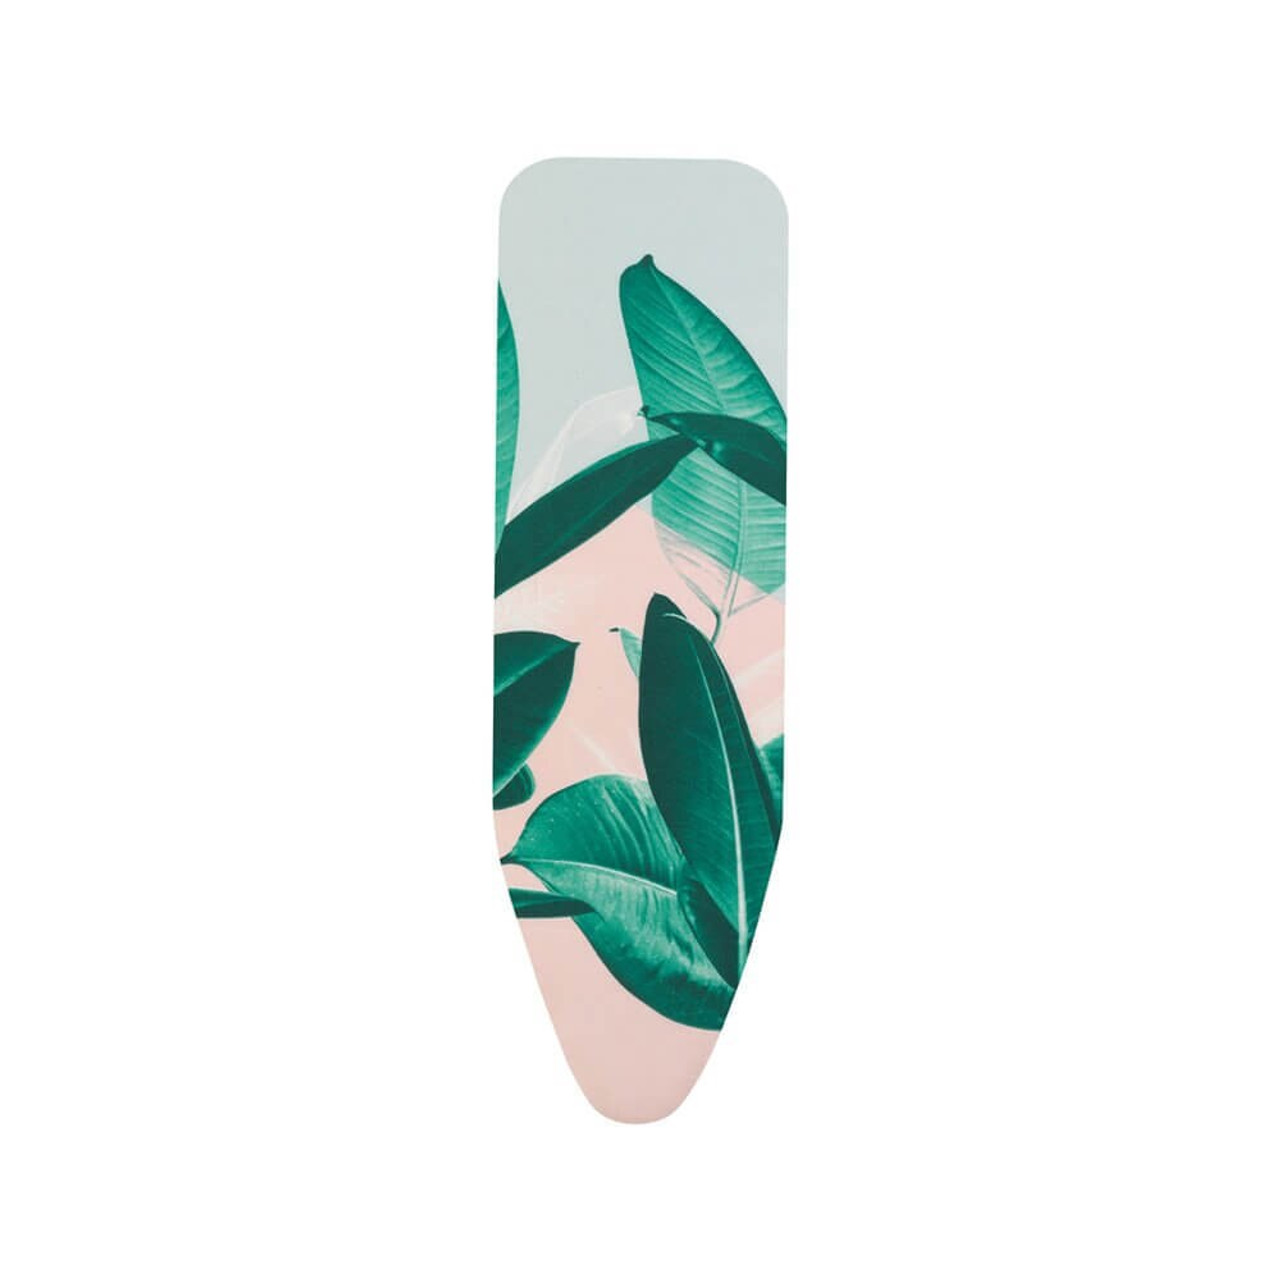 Brabantia Tropical Leaves Replacement Ironing Board Cotton Cover 4mm Foam  Underlay Size C - Laundry Company